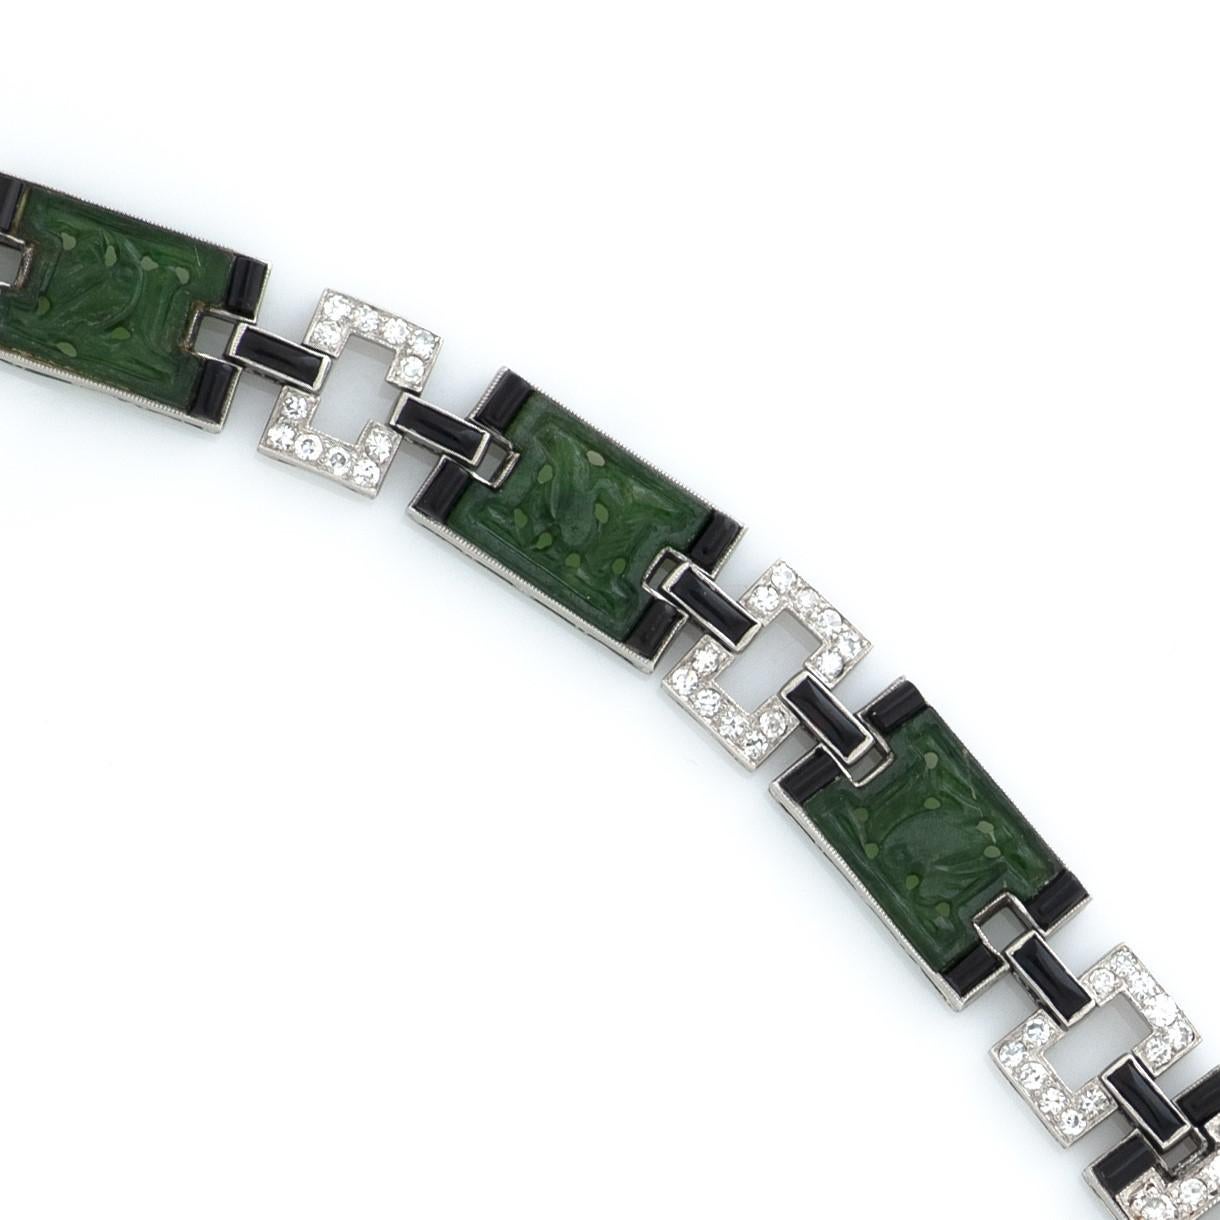 This Art Deco J.E. Caldwell & Co. platinum bracelet features 6 carved jade motifs separated by diamond and onyx links.  The links contain approximately 1.95 carats of single cut diamonds with G-I color and VS-SI1 clarity, with an additional 0.05